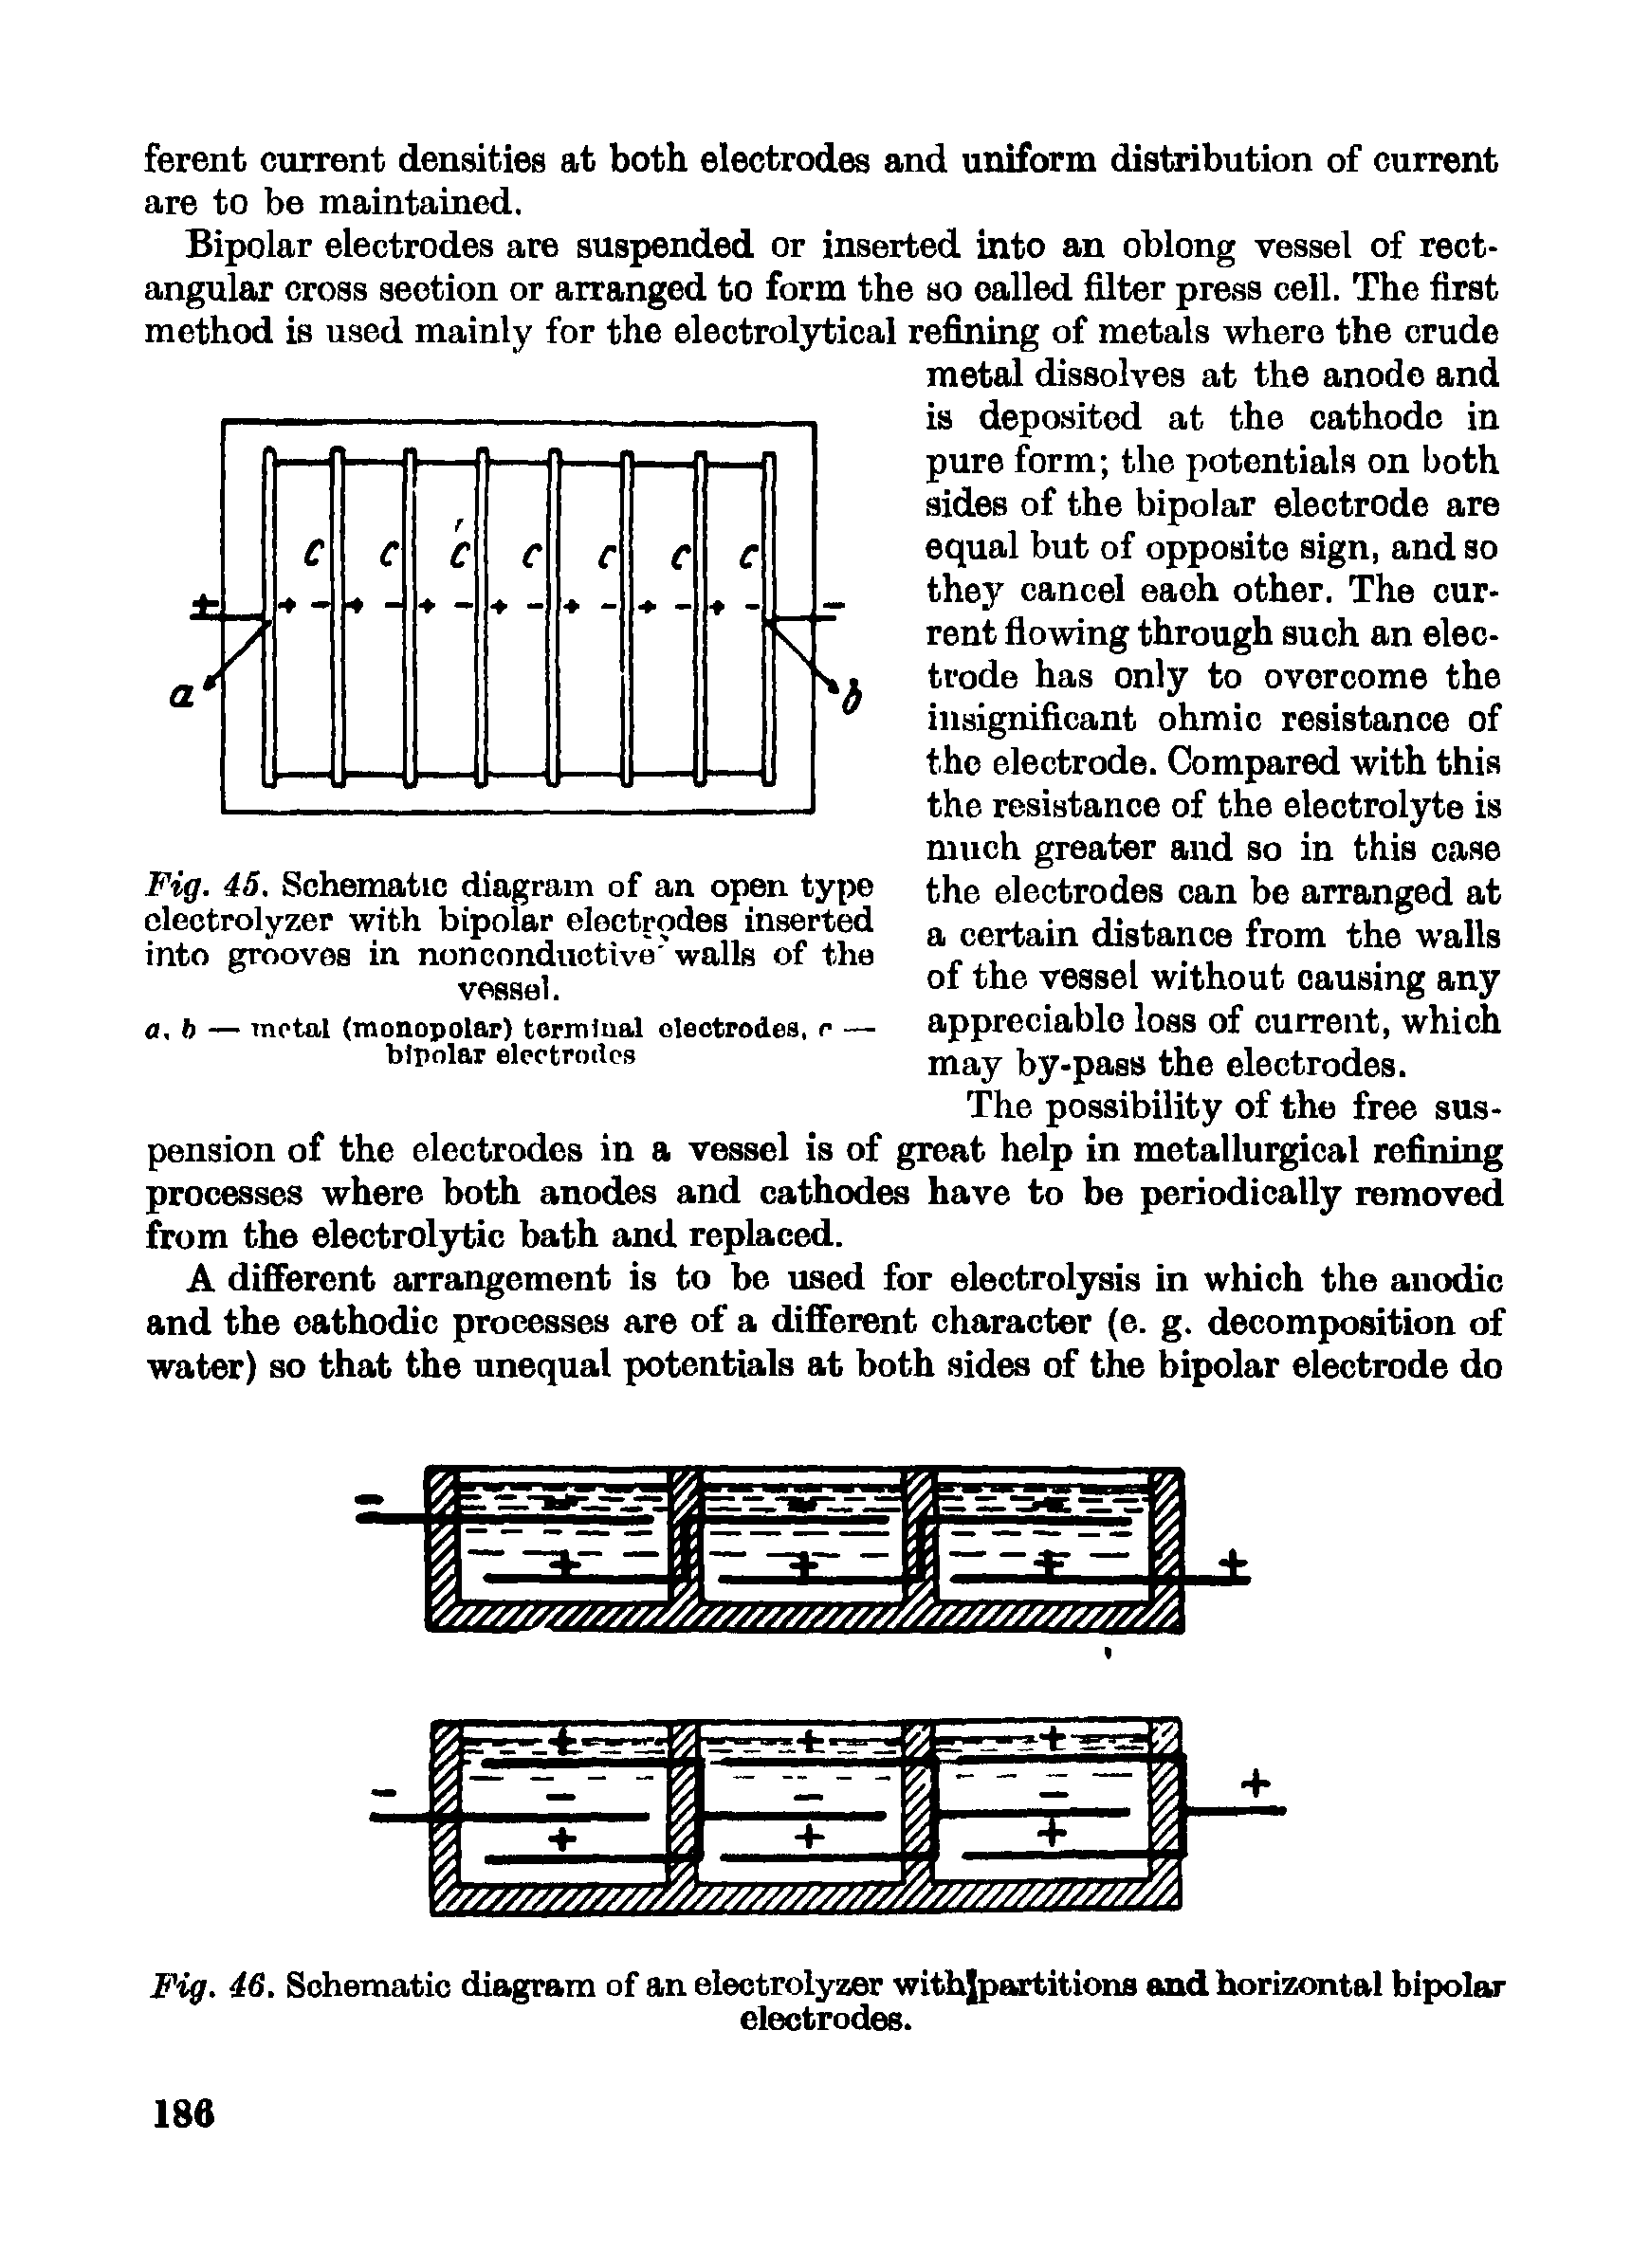 Fig. 45. Schematic diagram of an open type electrolyzer with bipolar electrodes inserted into grooves in nonconductivo walls of the vessel.